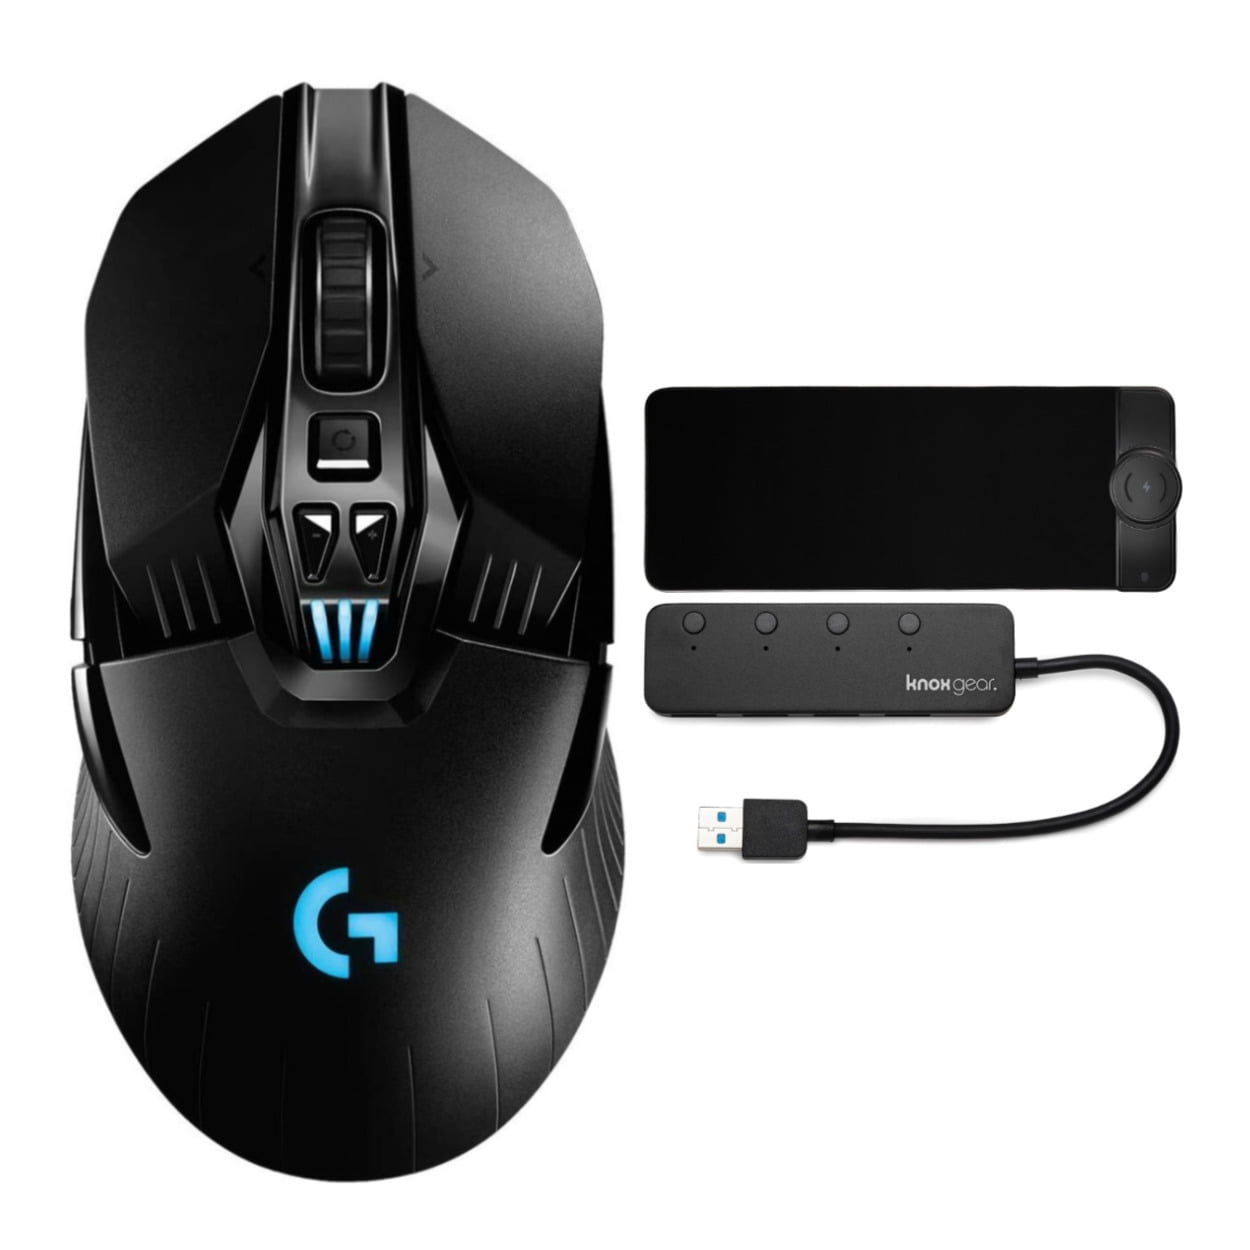 opladning Økonomi termometer Logitech G903 HERO Wireless Gaming Mouse Bundle with Mouse Pad and USB 3.0  Hub - Walmart.com